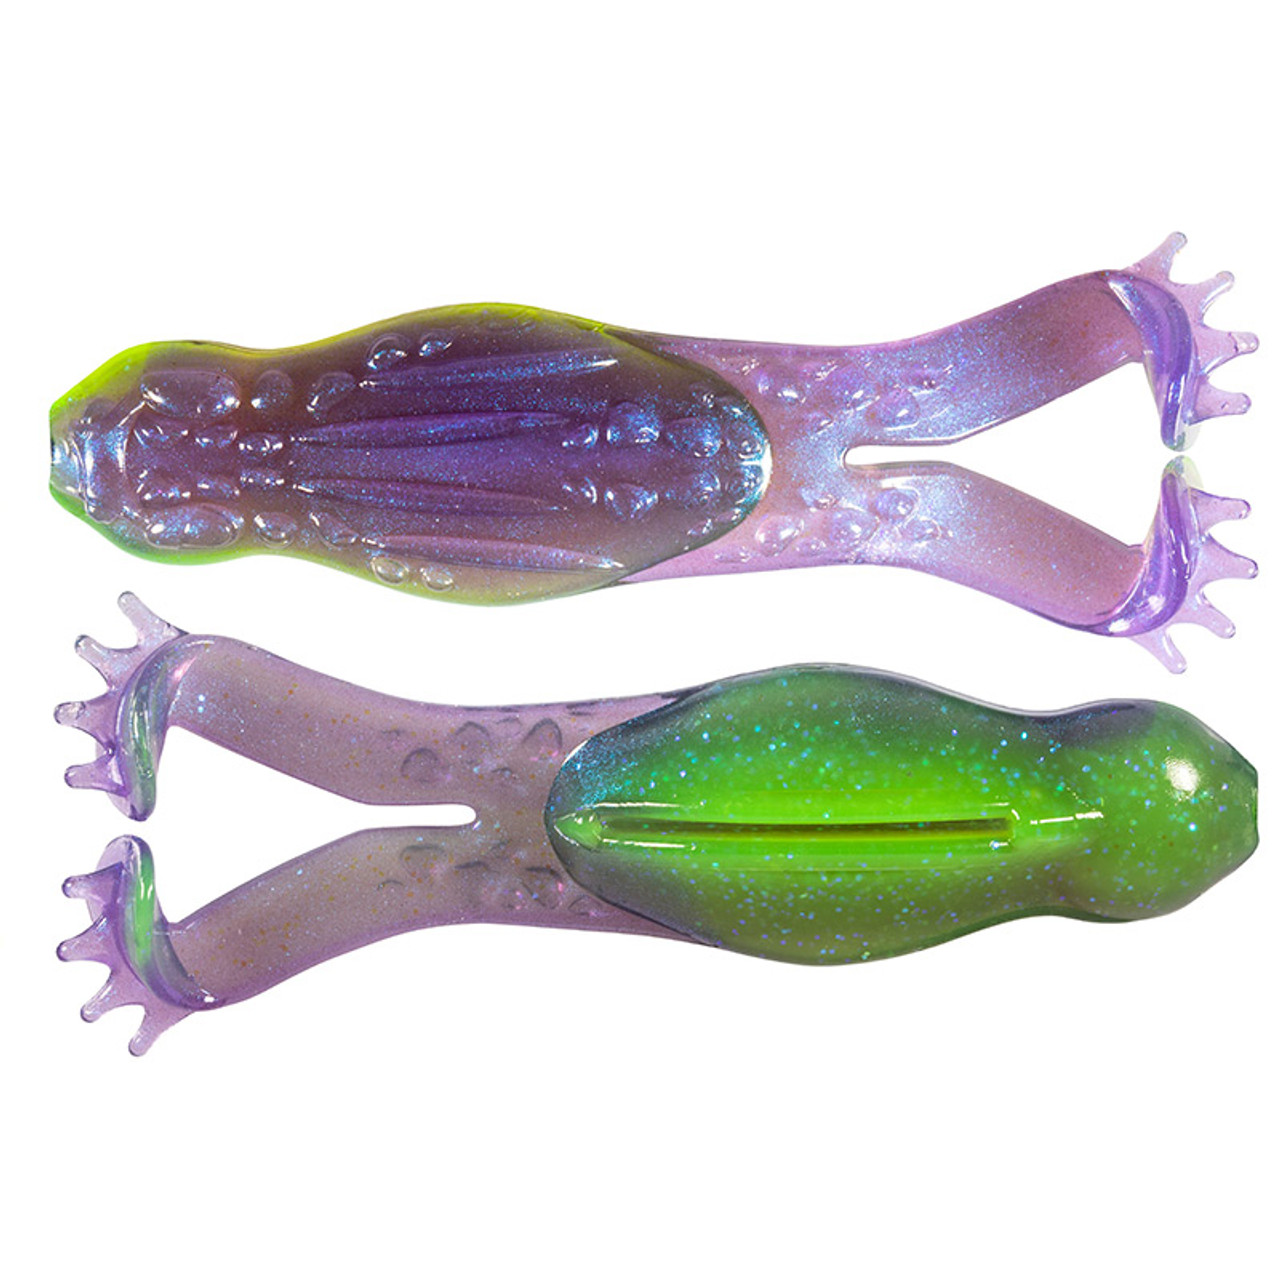 GOAT ToadZ 4" Topwater Frog by Z-Man